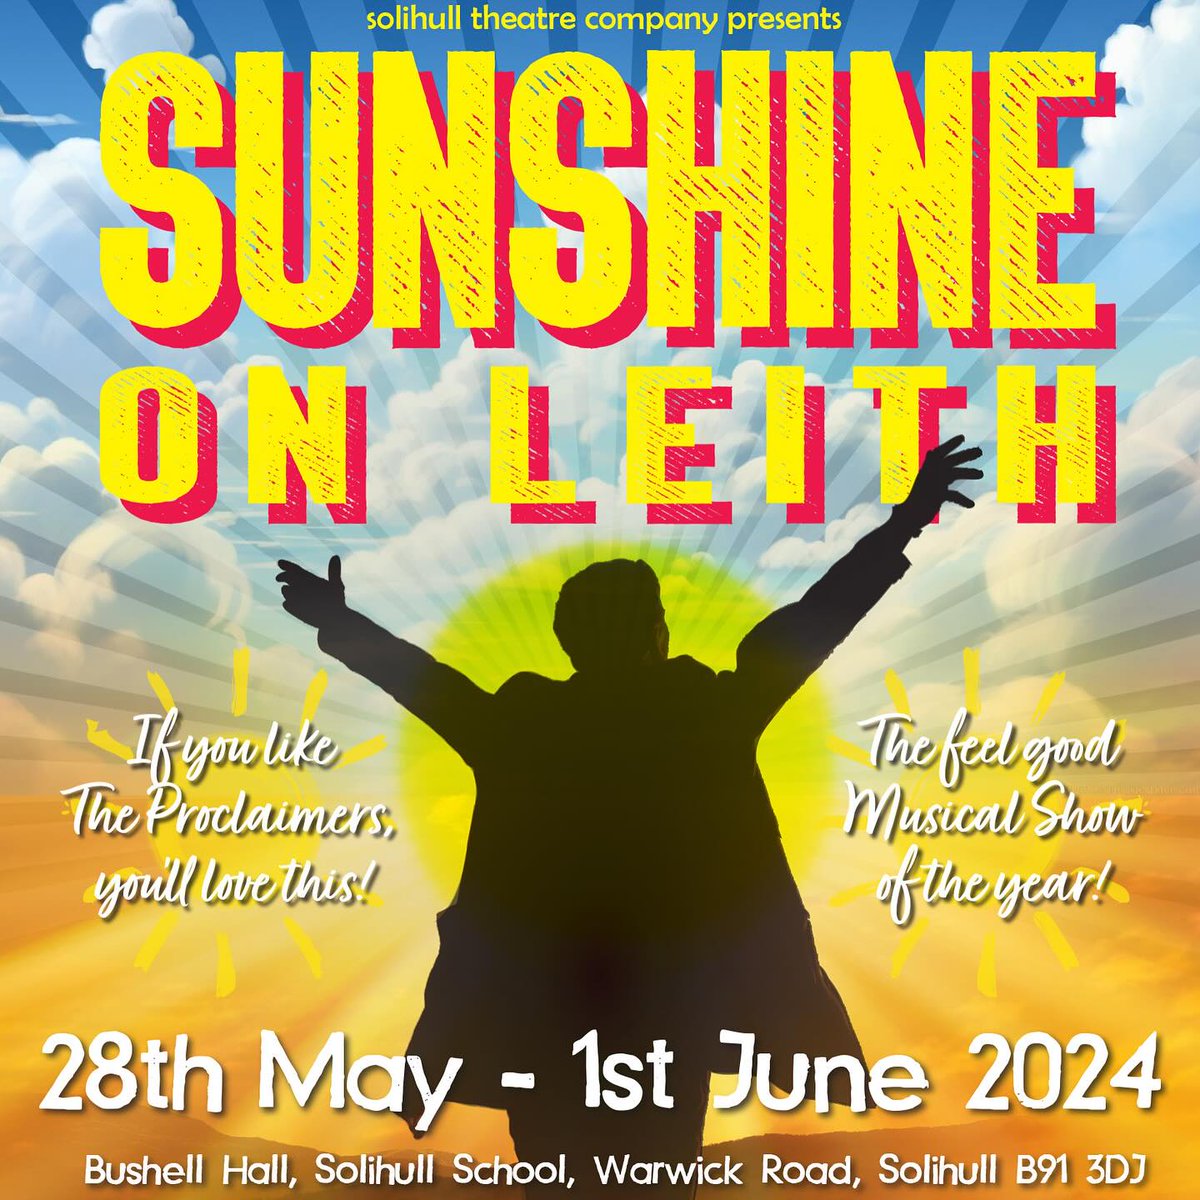 Solihull Theatre Company brings 'Sunshine on Leith' to Solihull School's Bushell Hall from 28 May to 1 June. 🎵☀️#BrumHour A jubilant, heartfelt musical featuring the music of The Proclaimers. Book now at thecoretheatresolihull.co.uk/whats-on/all-s…